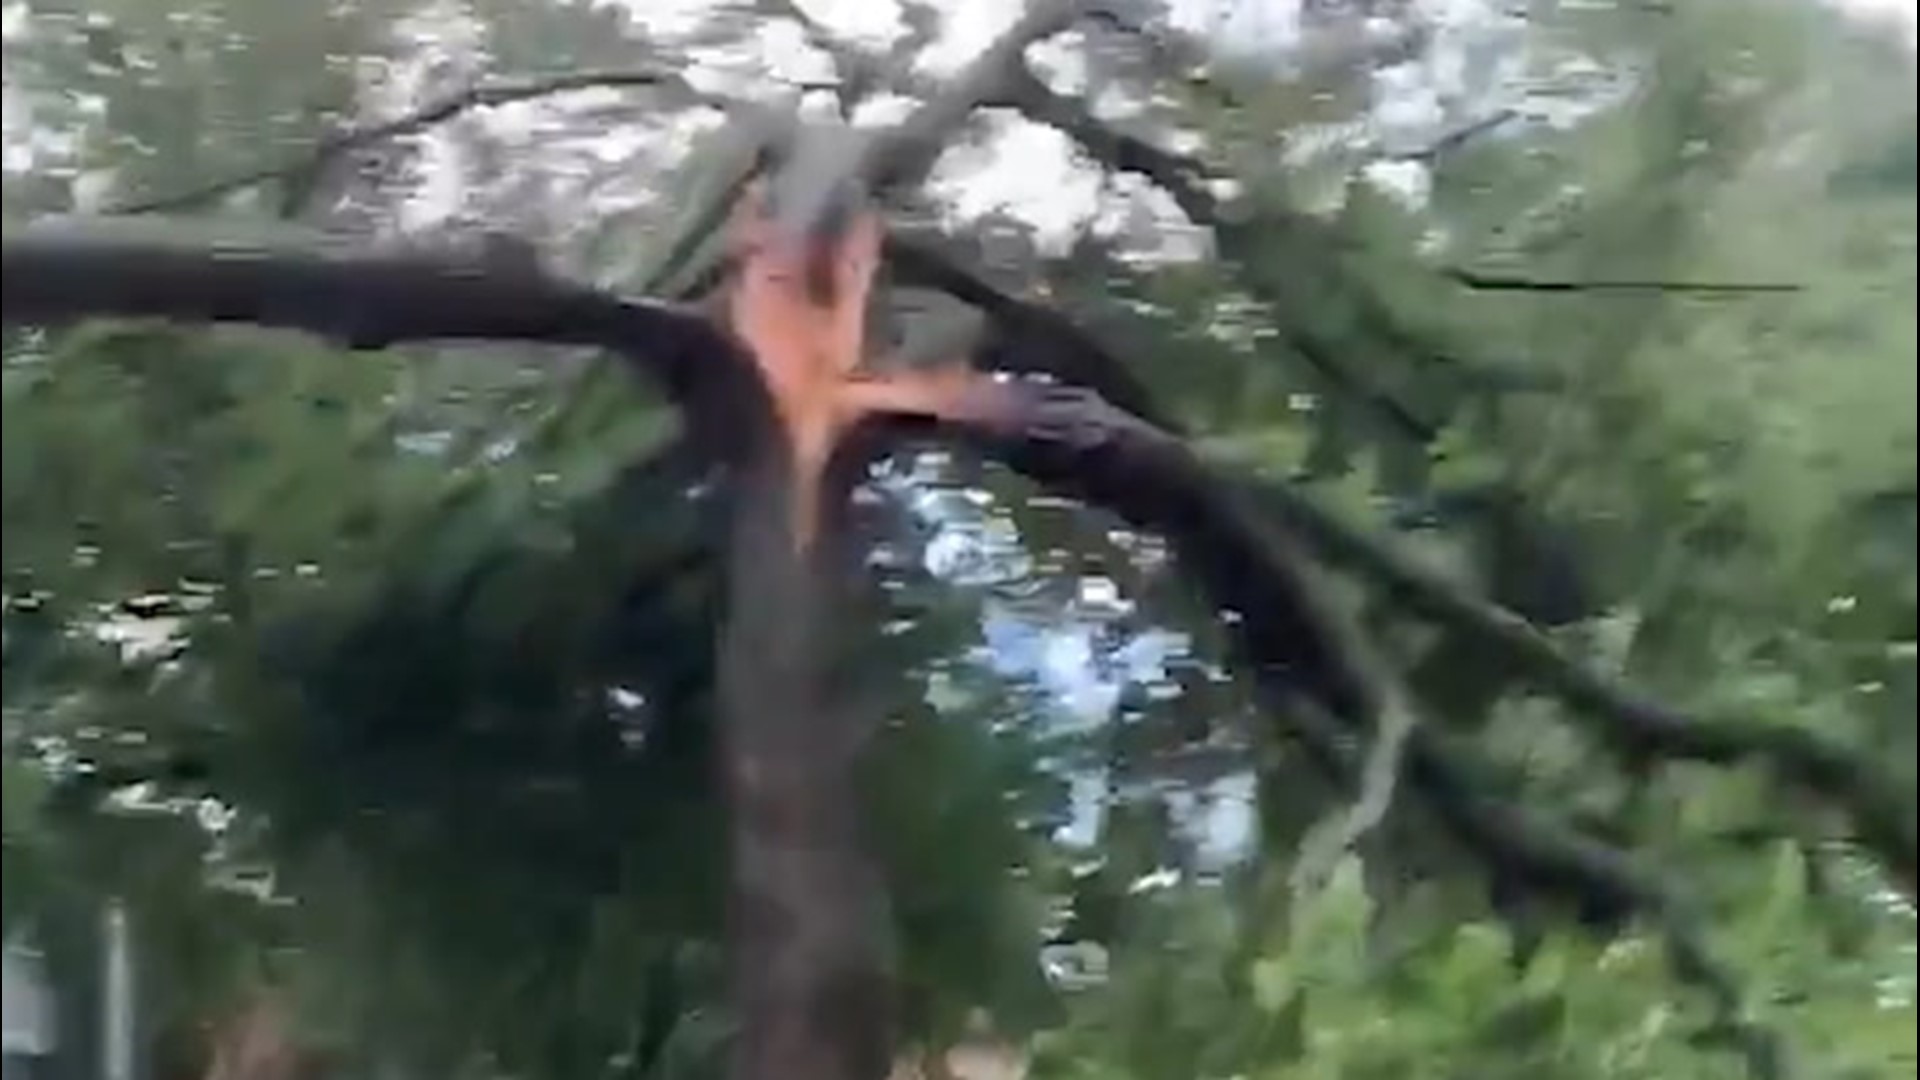 On Sunday night, July 5, lightning struck this tree in Mesquite, Texas, causing the top of the trunk to split in three parts.